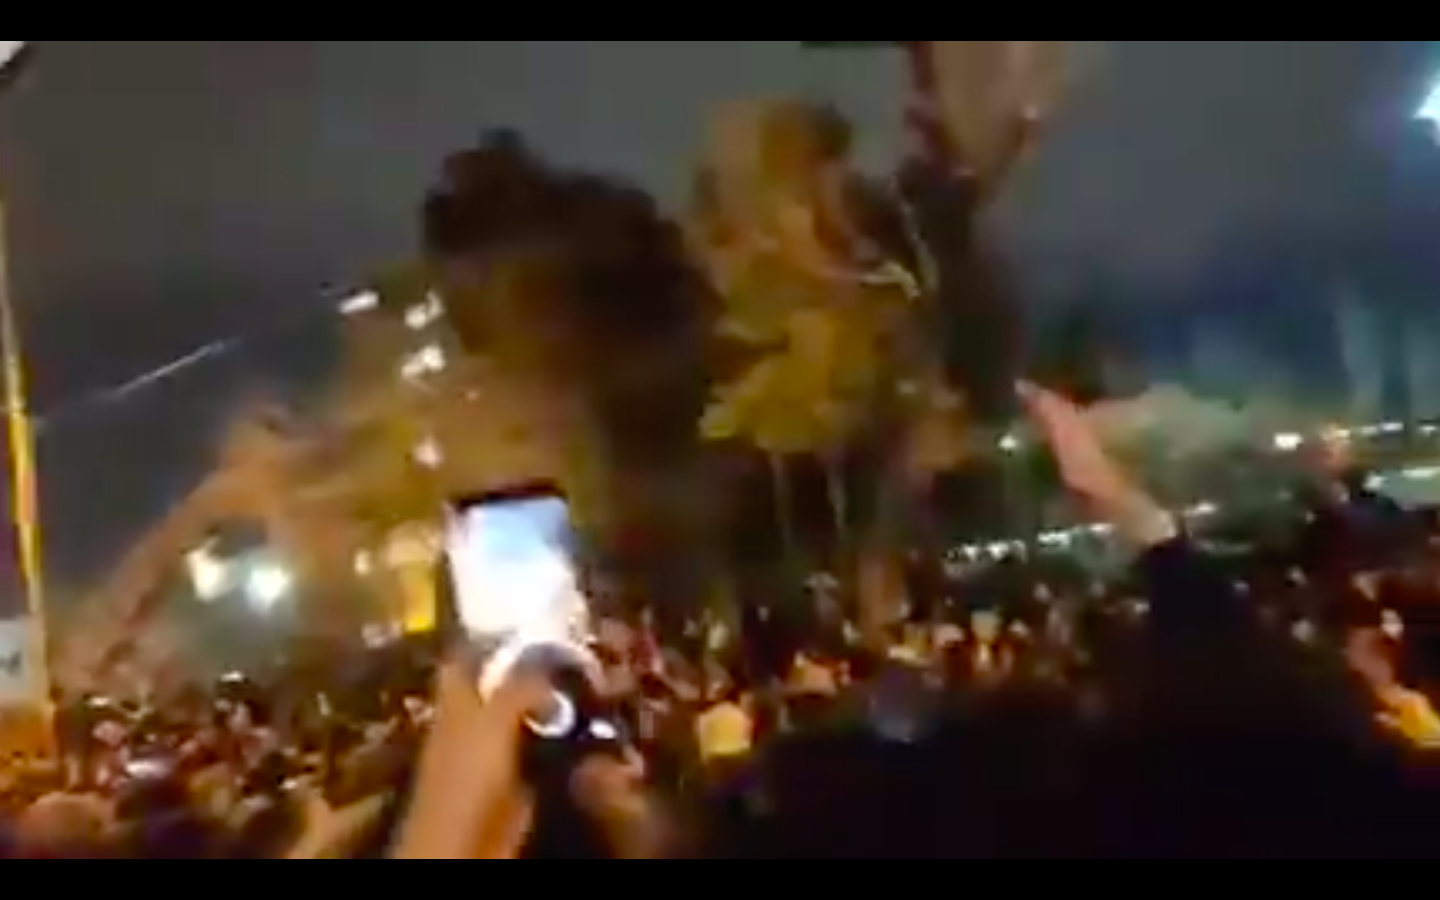 Iran Revolution Update: Anti-Regime Protests By University Students In Tehran Are Spreading